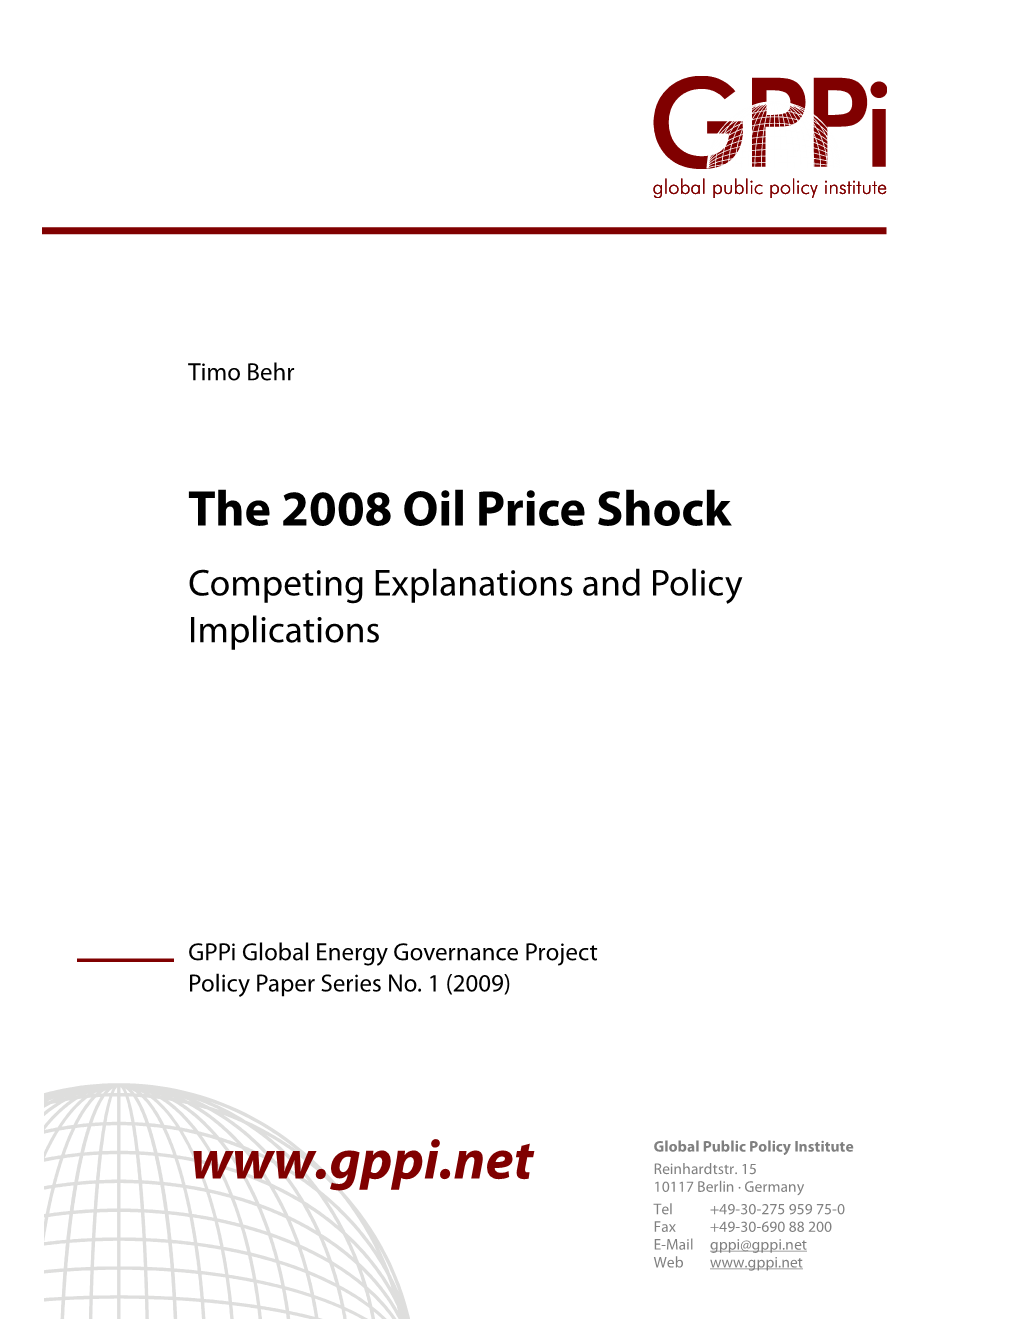 The 2008 Oil Price Shock Competing Explanations and Policy Implications